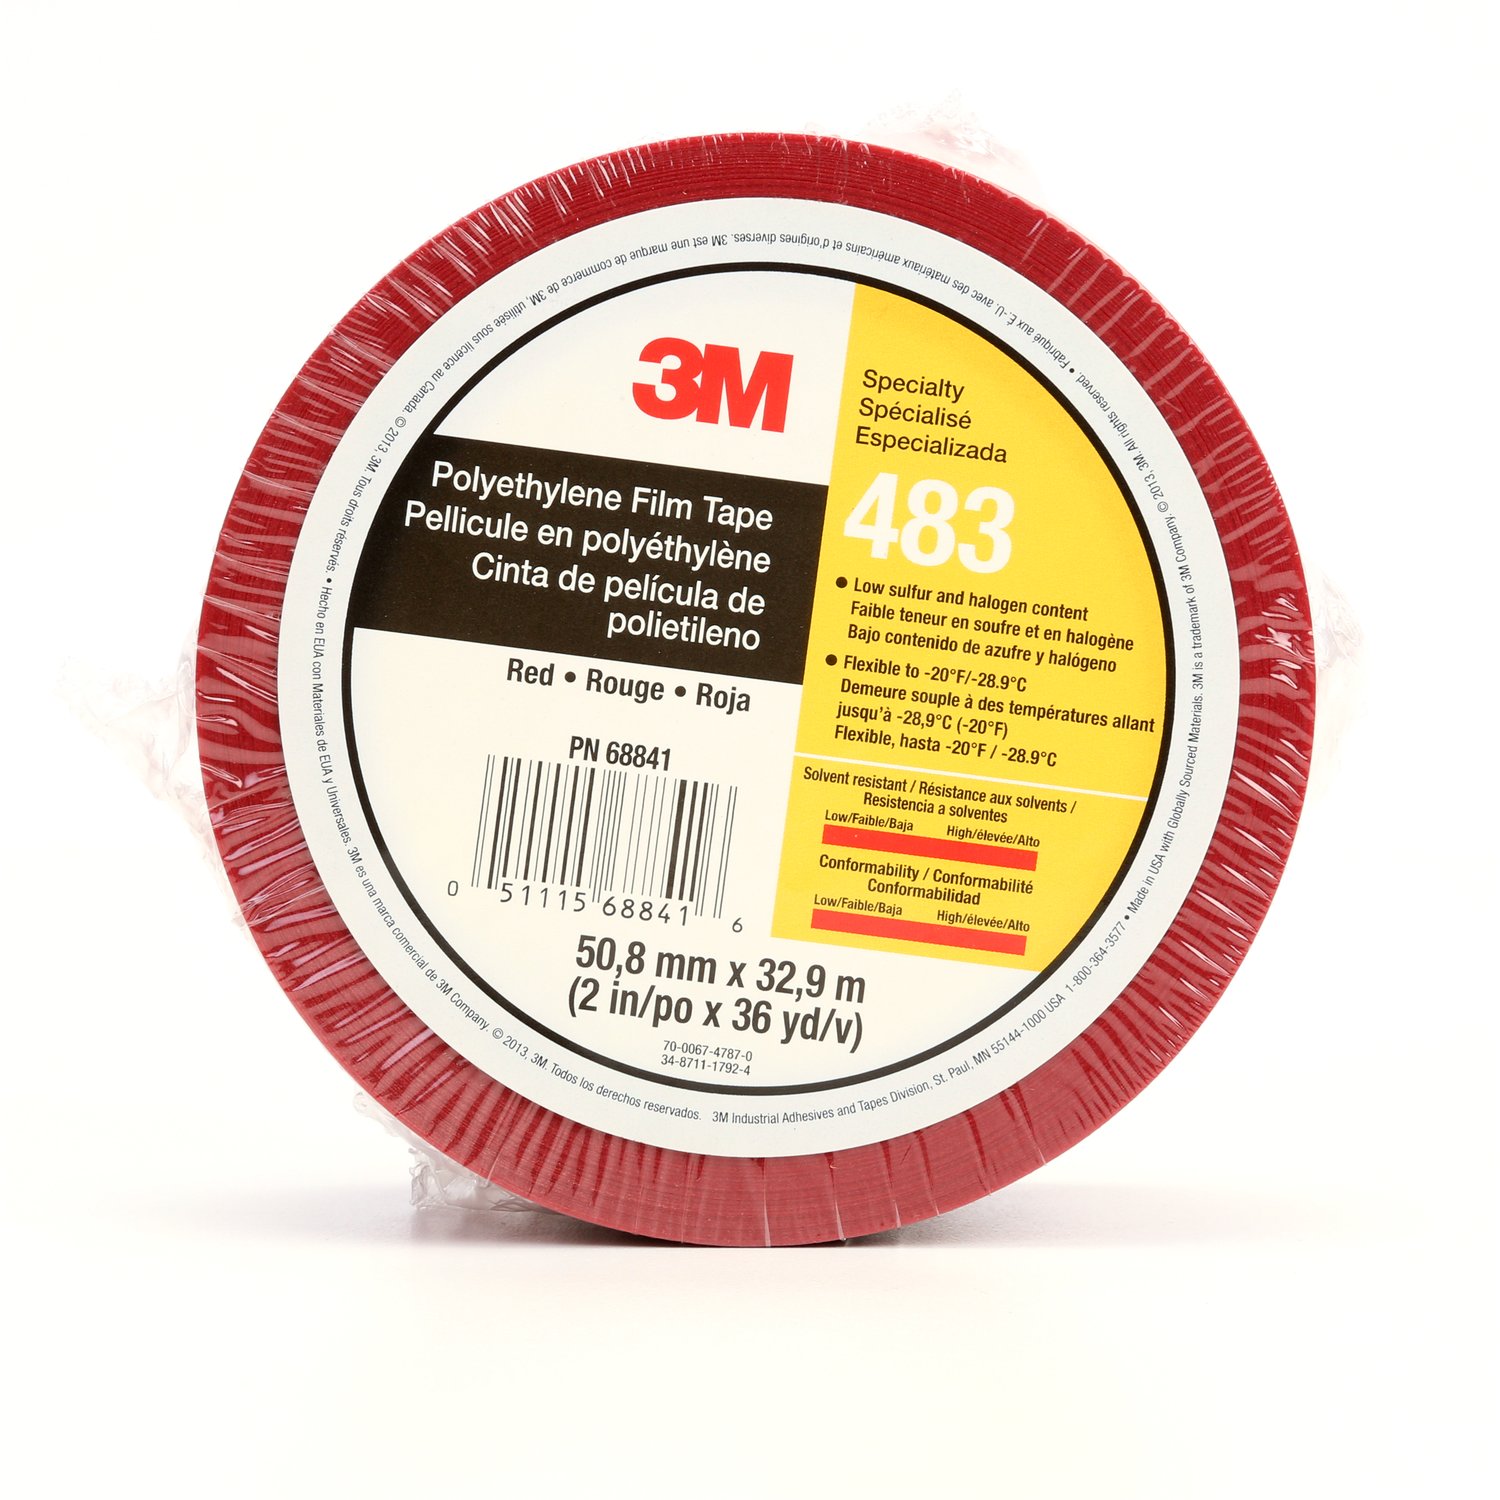 7010375084 - 3M Polyethylene Tape 483, Red, 2 in x 36 yd, 5.0 mil, 24 rolls per
case, Individually Wrapped Conveniently Packaged